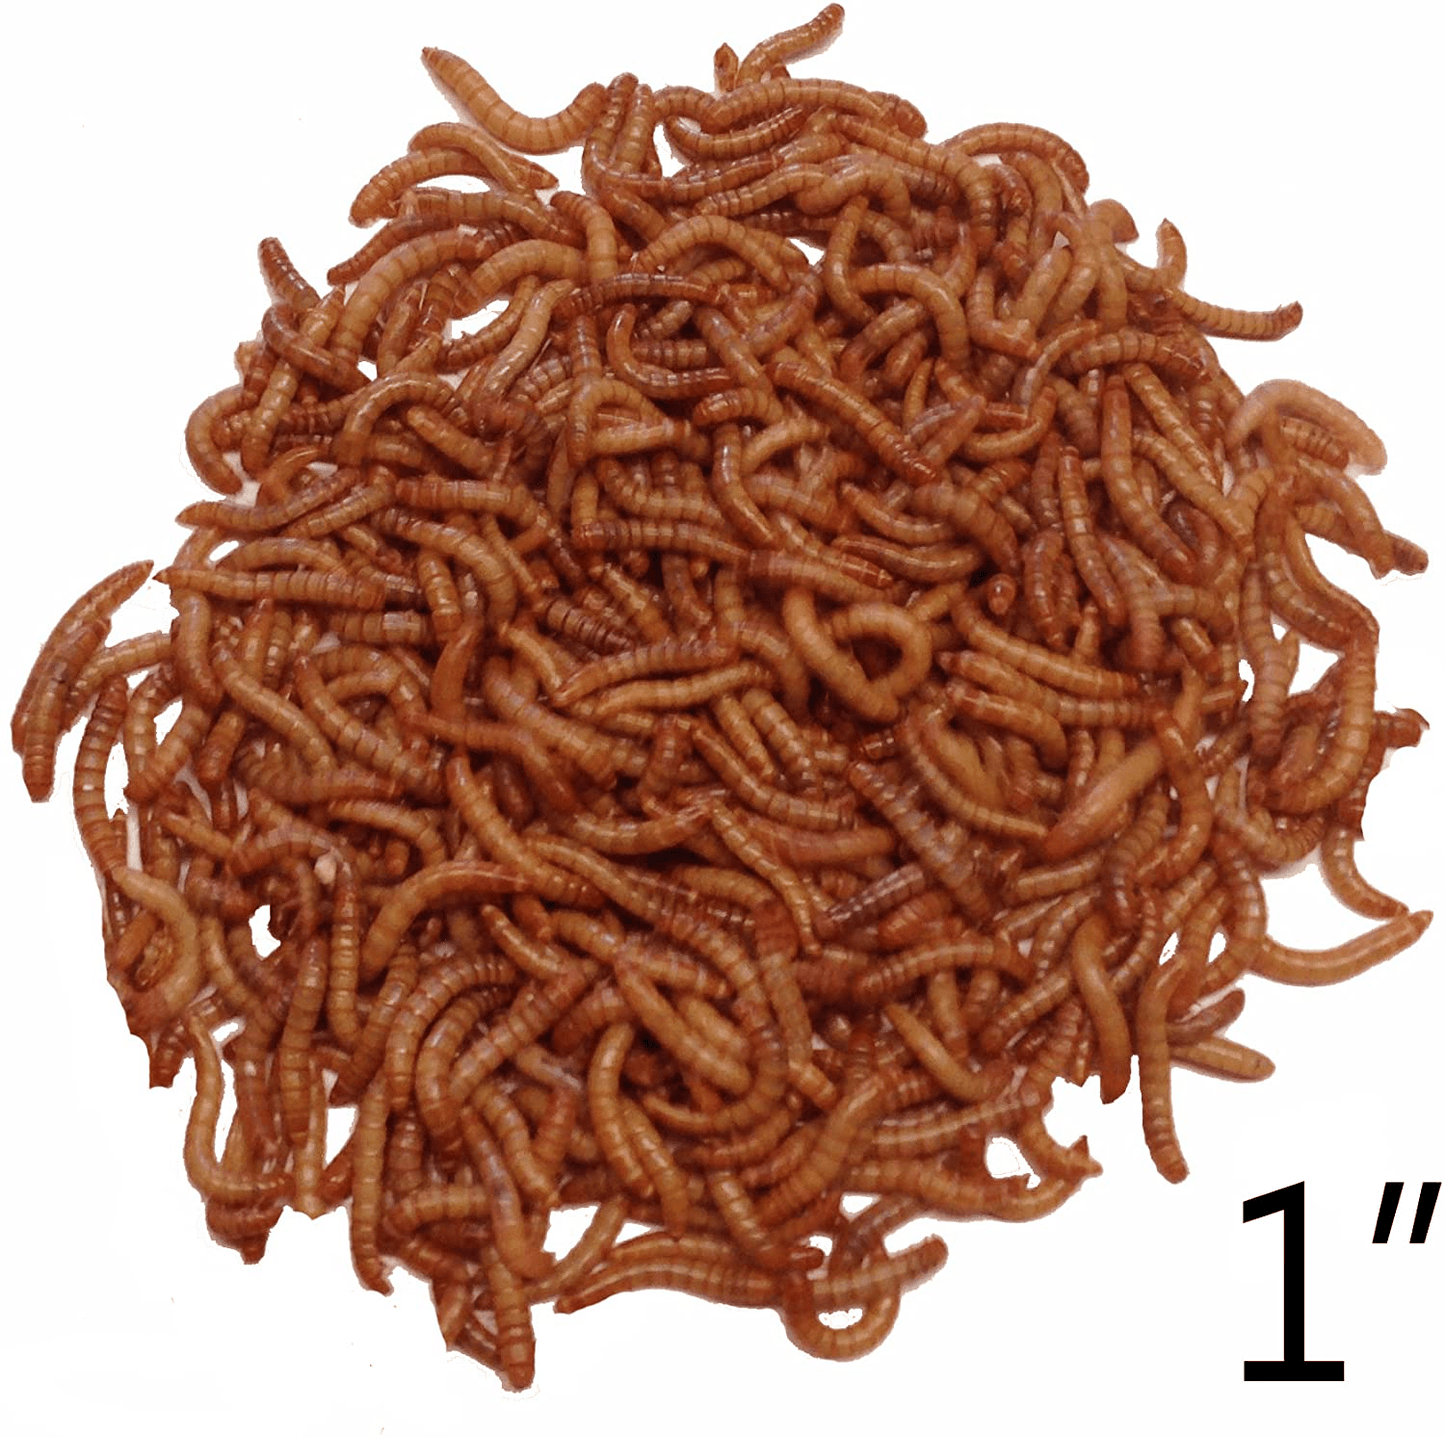 3000 Live Mealworms, Reptile, Birds, Chickens, Fish Food (Large) by Dbdpet | Live Arrival Is Guaranteed Animals & Pet Supplies > Pet Supplies > Reptile & Amphibian Supplies > Reptile & Amphibian Food DBDPet   